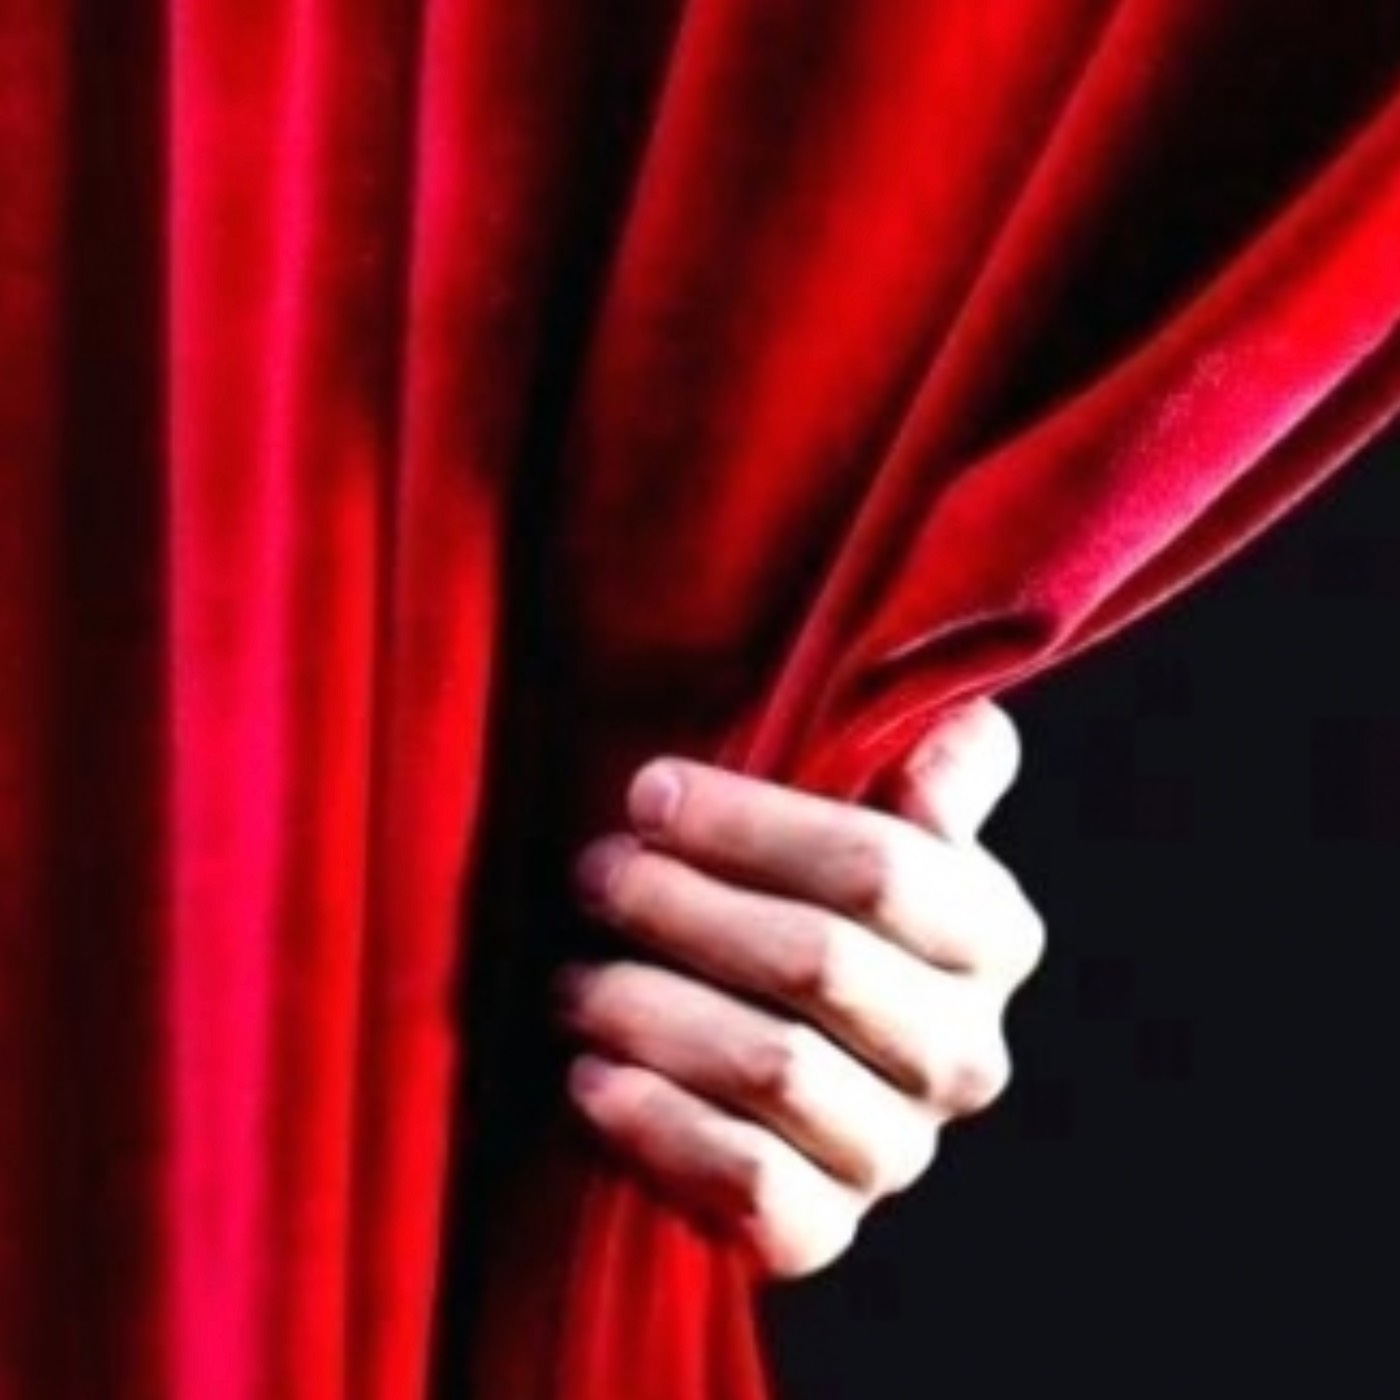 hand pulling back red curtain